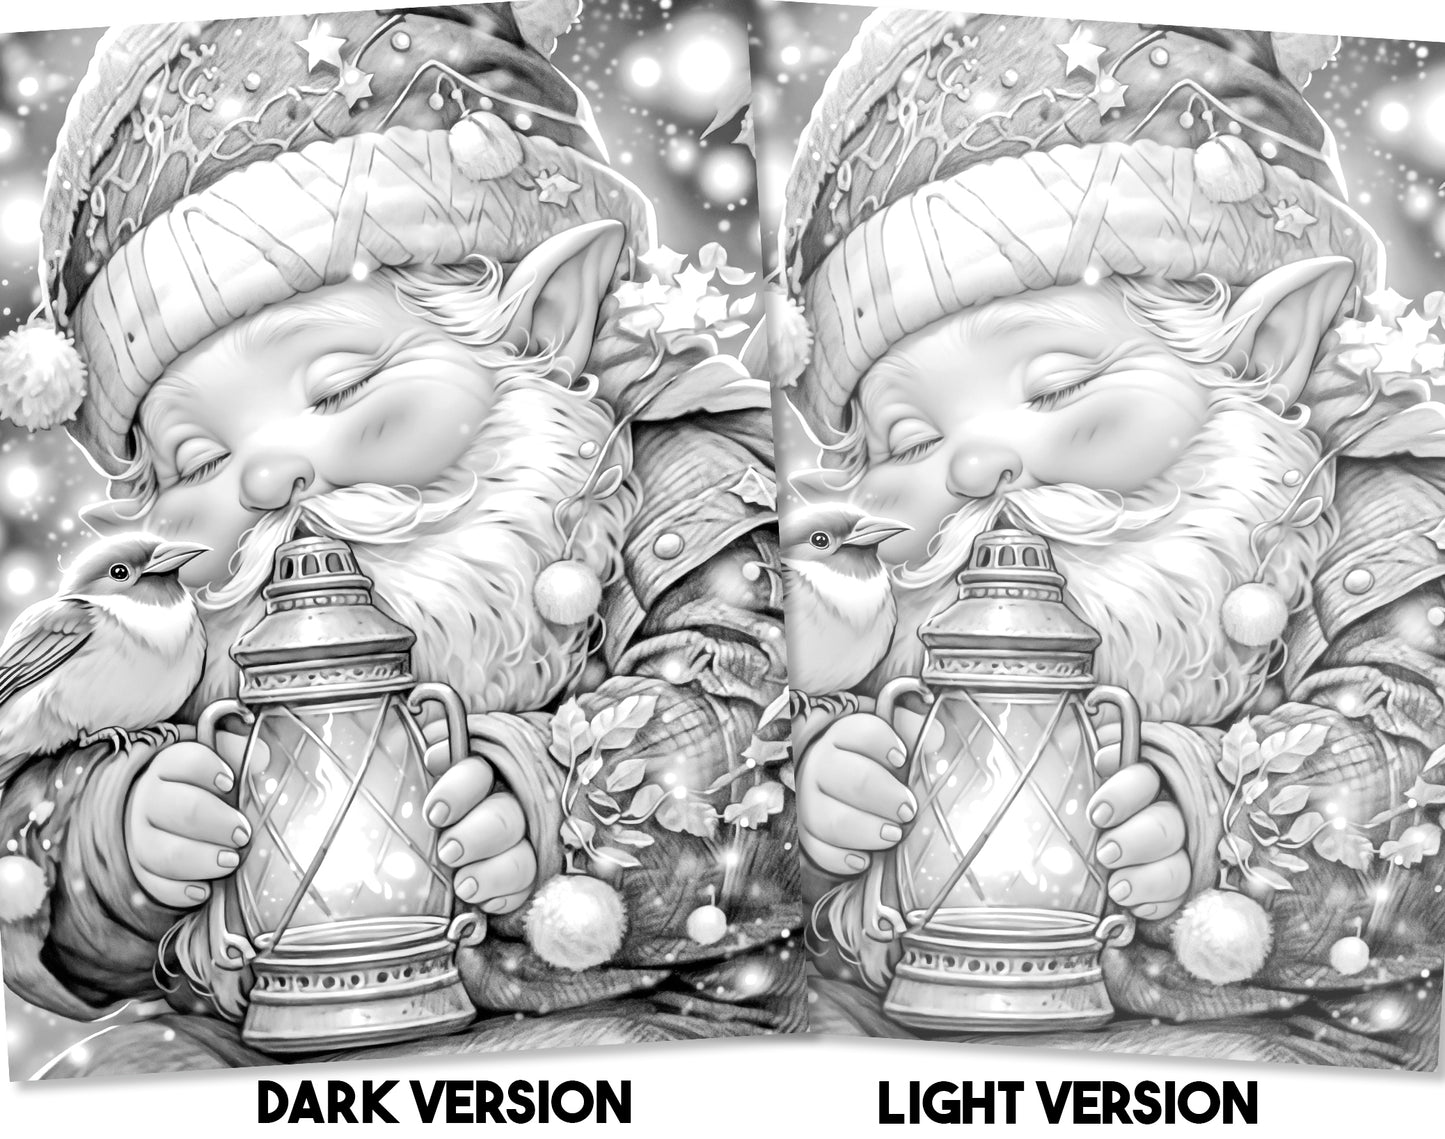 60 Winter Gnomes Grayscale Coloring Pages - Instant Download - Printable Dark/Light